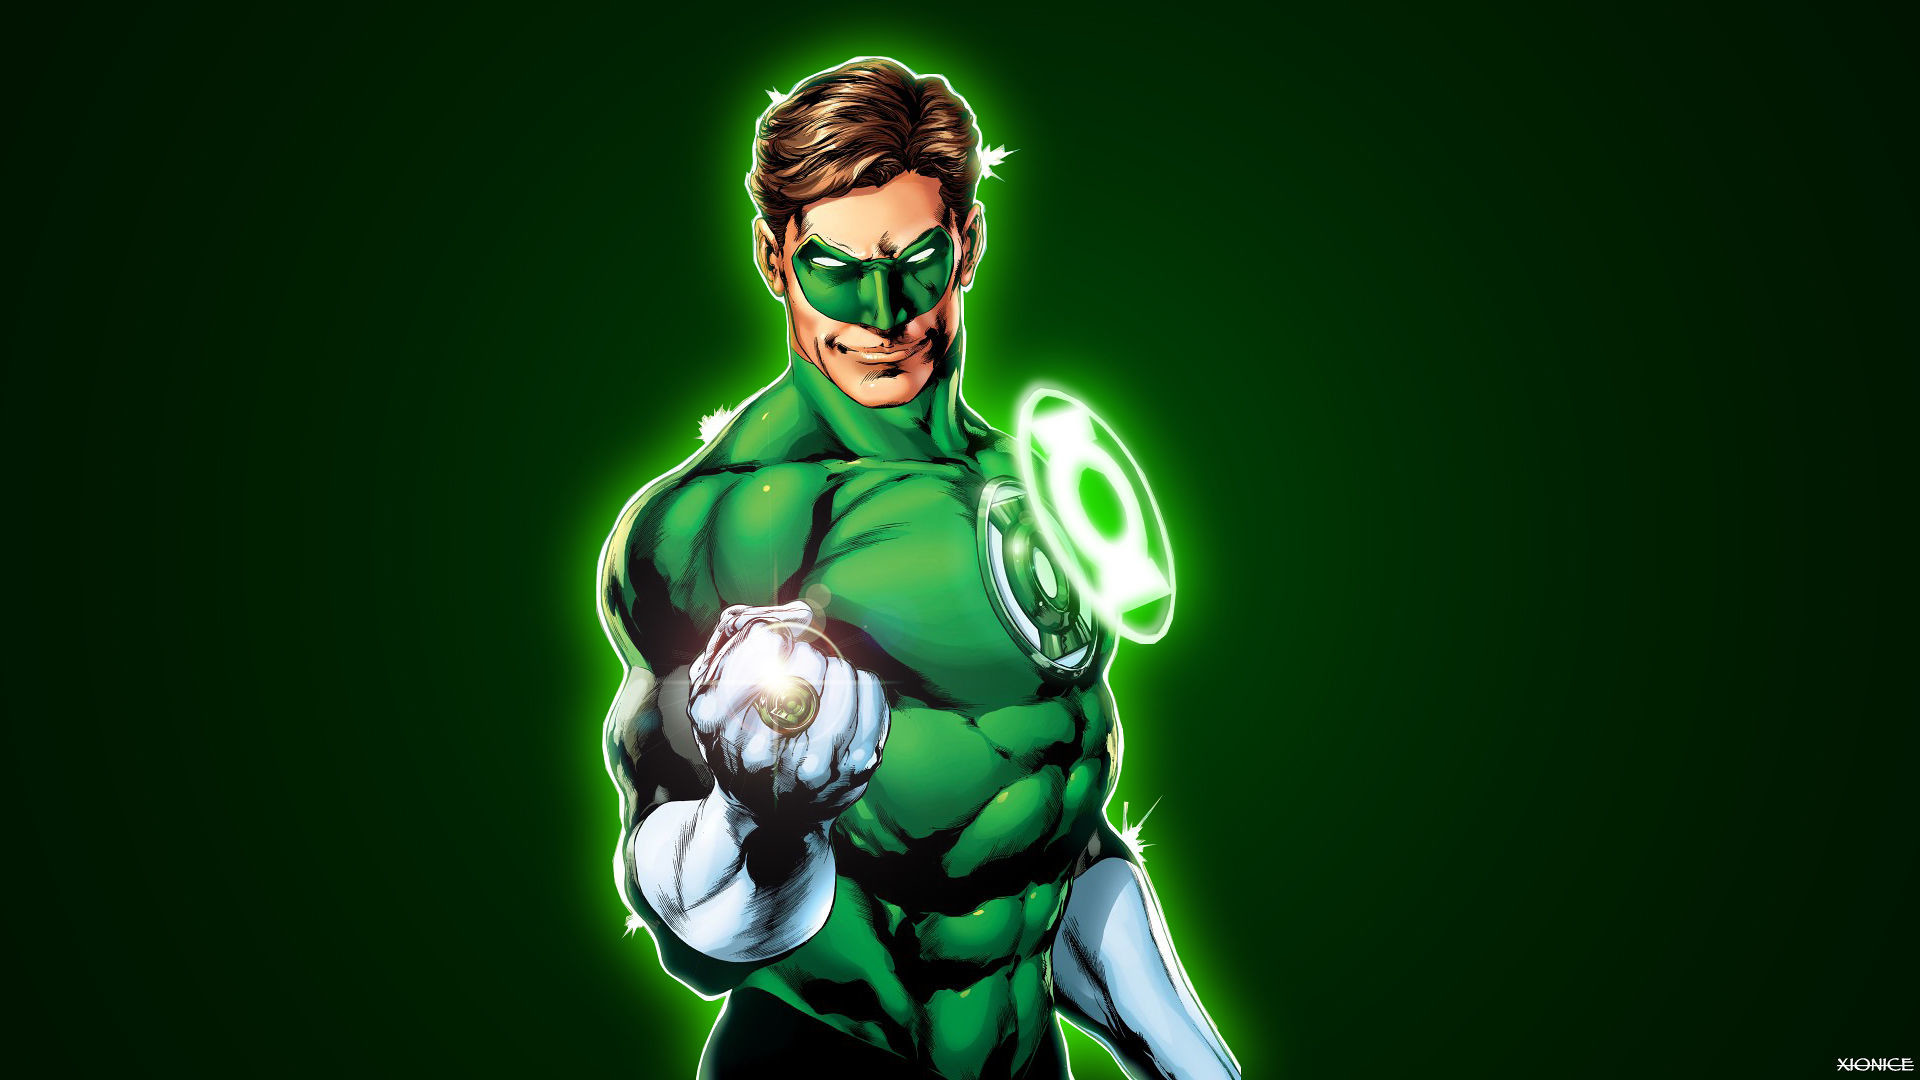 1920x1080 Explore Green Lantern Actor, Green Lantern Corps, and more!